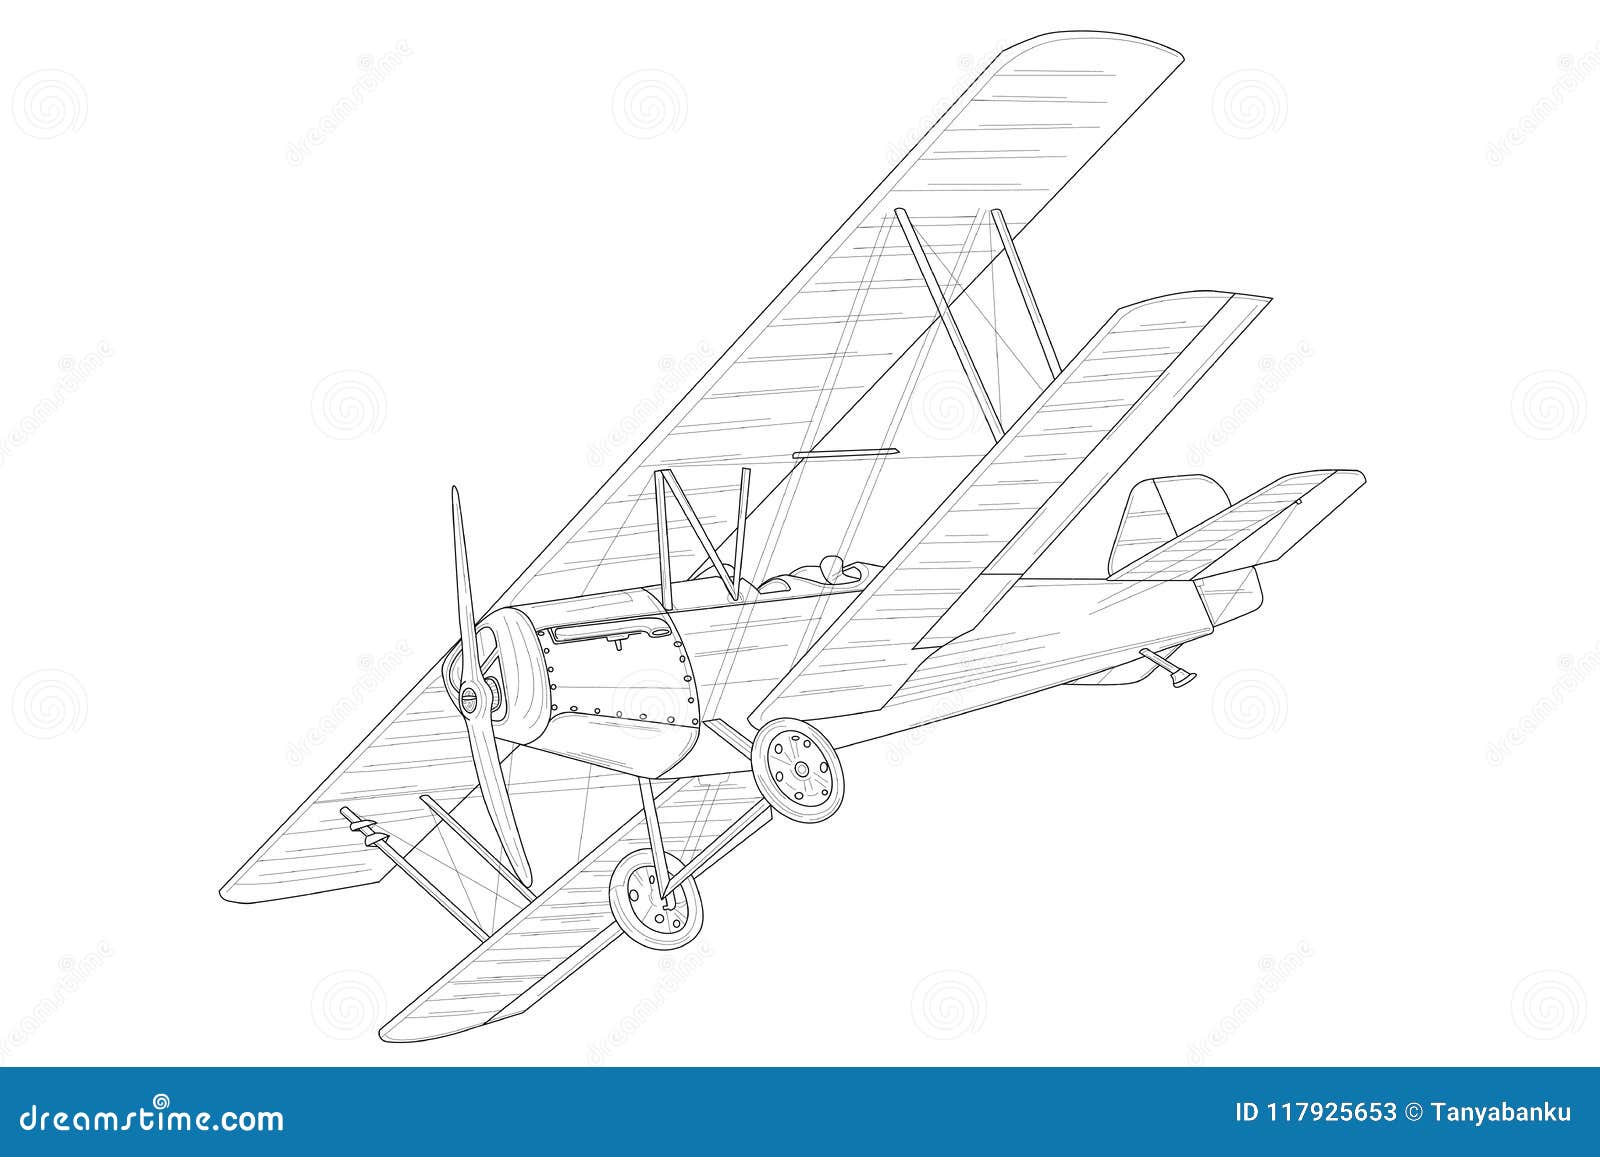 retro vintage airplane with outlines